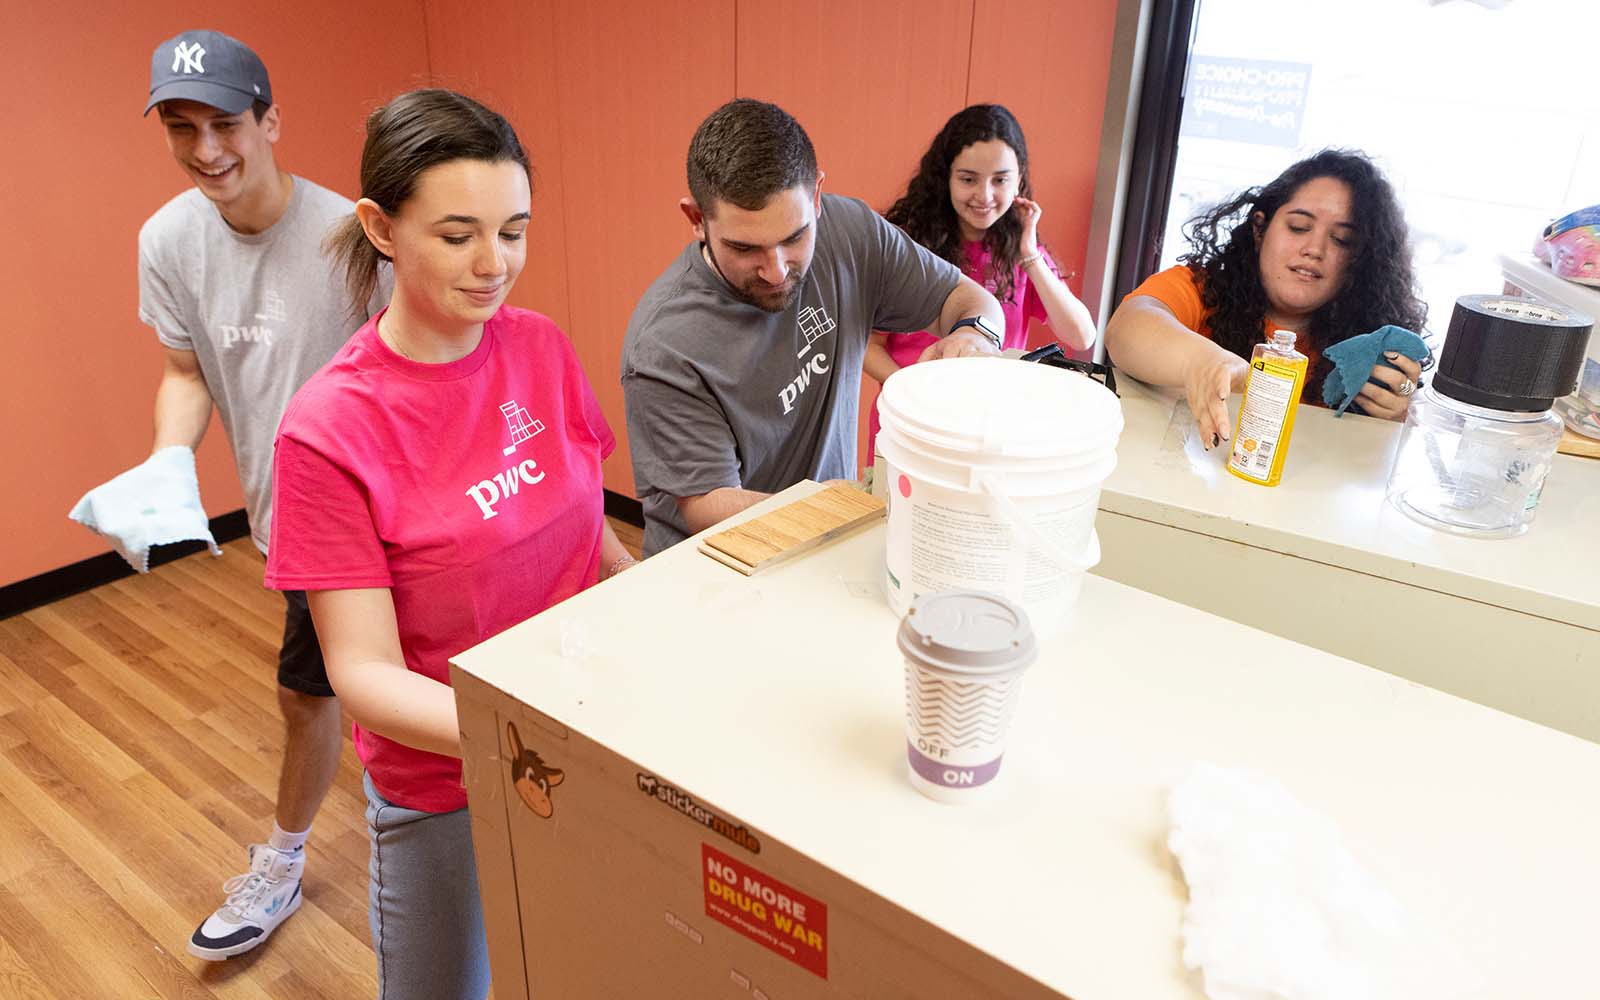 Students in the Binghamton University School of Management's PwC Scholars help spruce up the headquarters of Truth Pharm, a nonprofit organization in Binghamton, N.Y. that advocates for policy changes to reduce the harms caused by substance use.